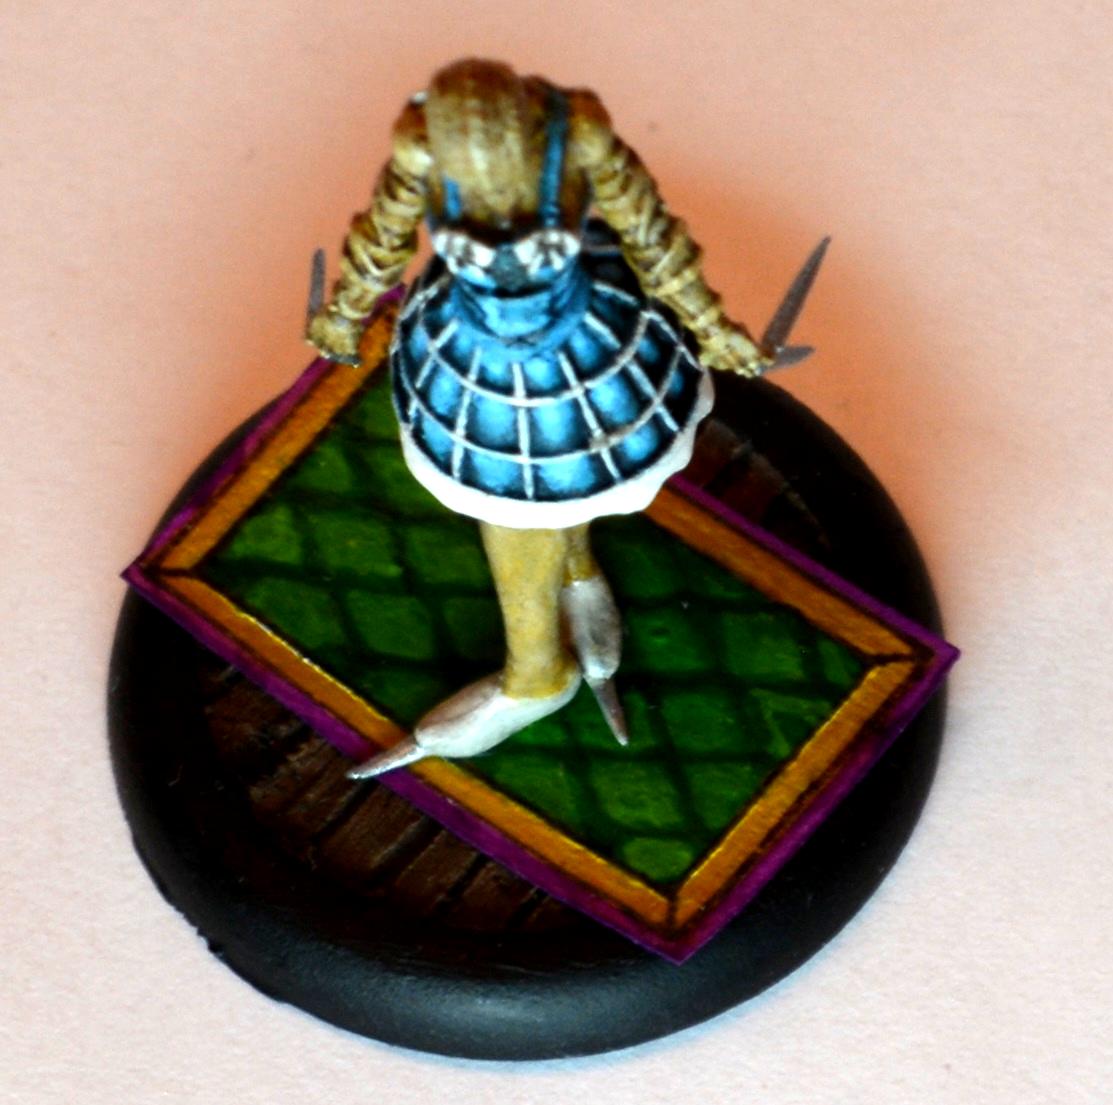 Arcanists, Colette, Malifaux